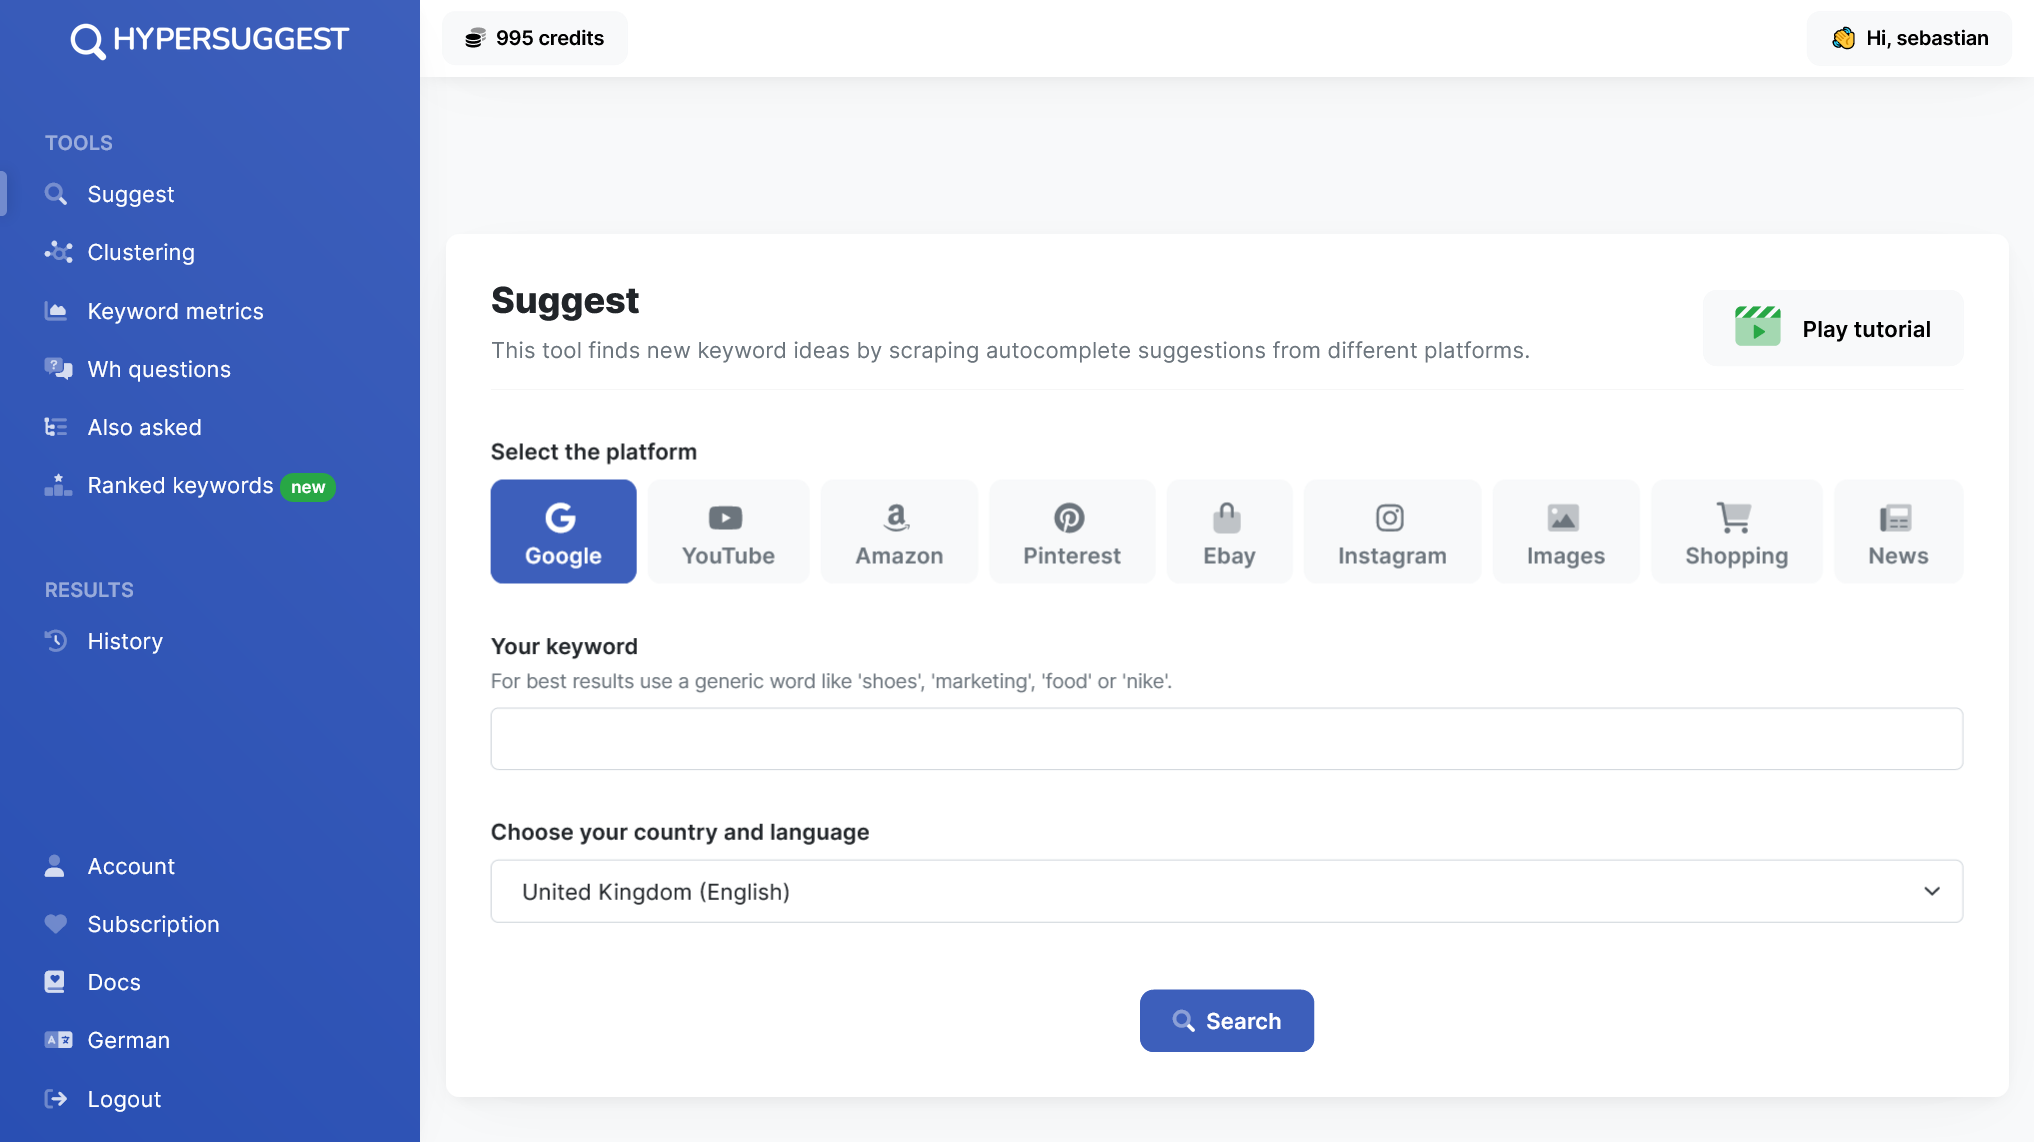 Select the platform you want keyword ideas from